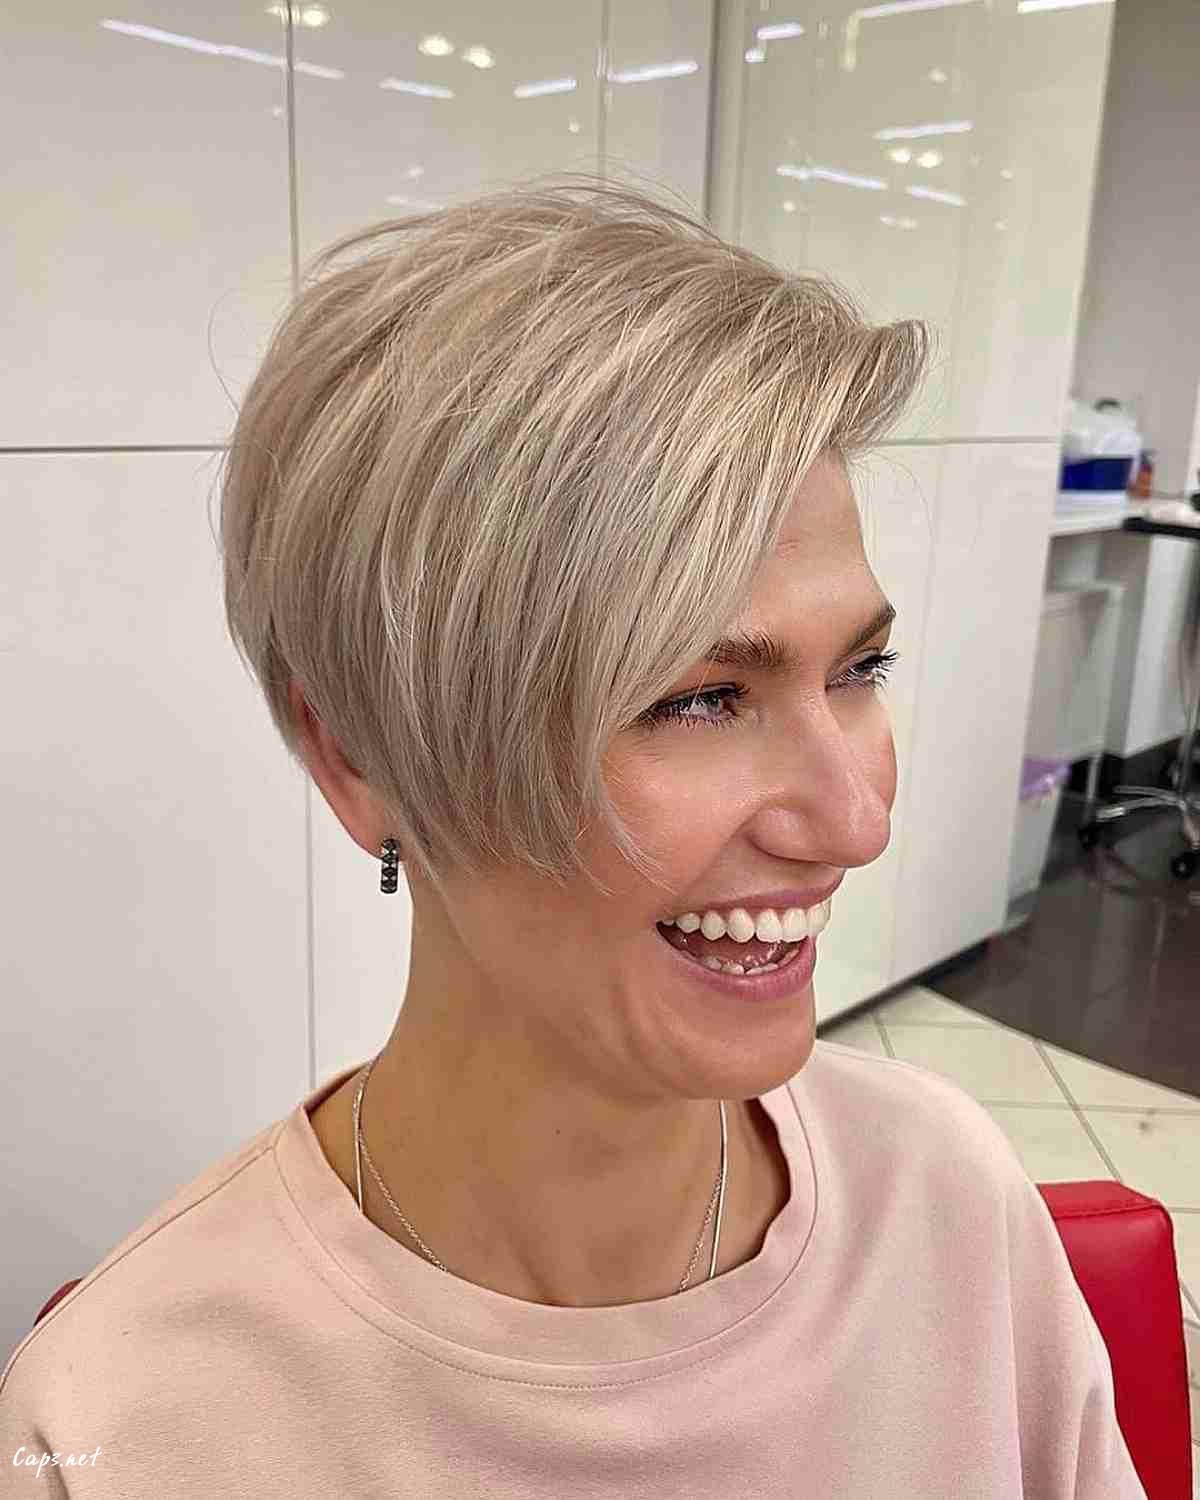 classic disconnected pixie cuts